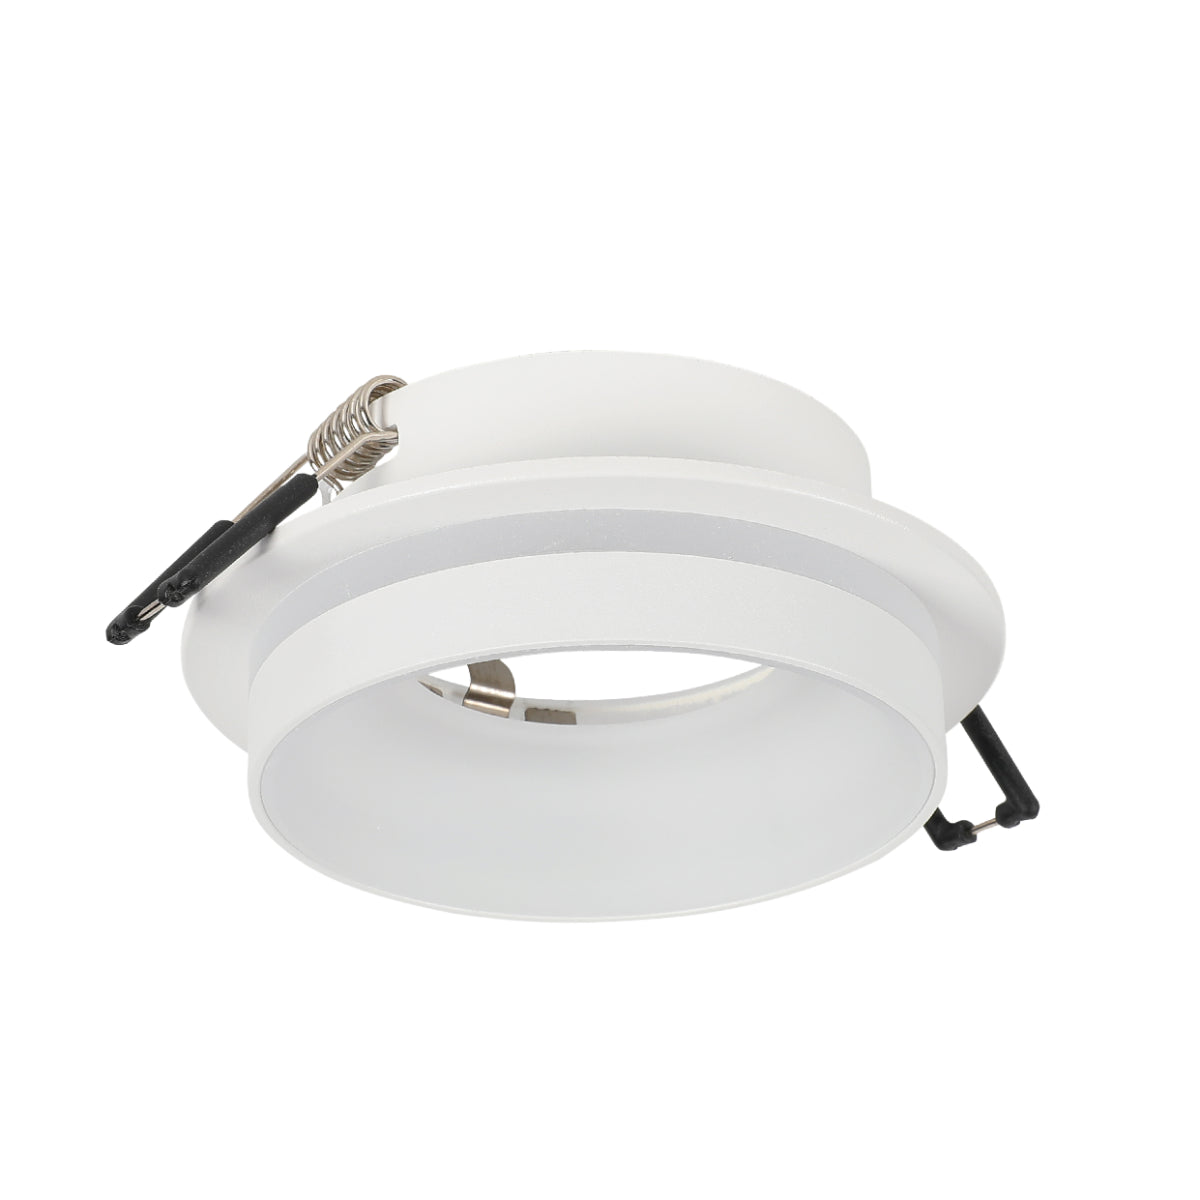 Main image of GU10 Recessed Aluminium Downlight - Dual-Tone Acrylic with Color Matched Trim 143-04043